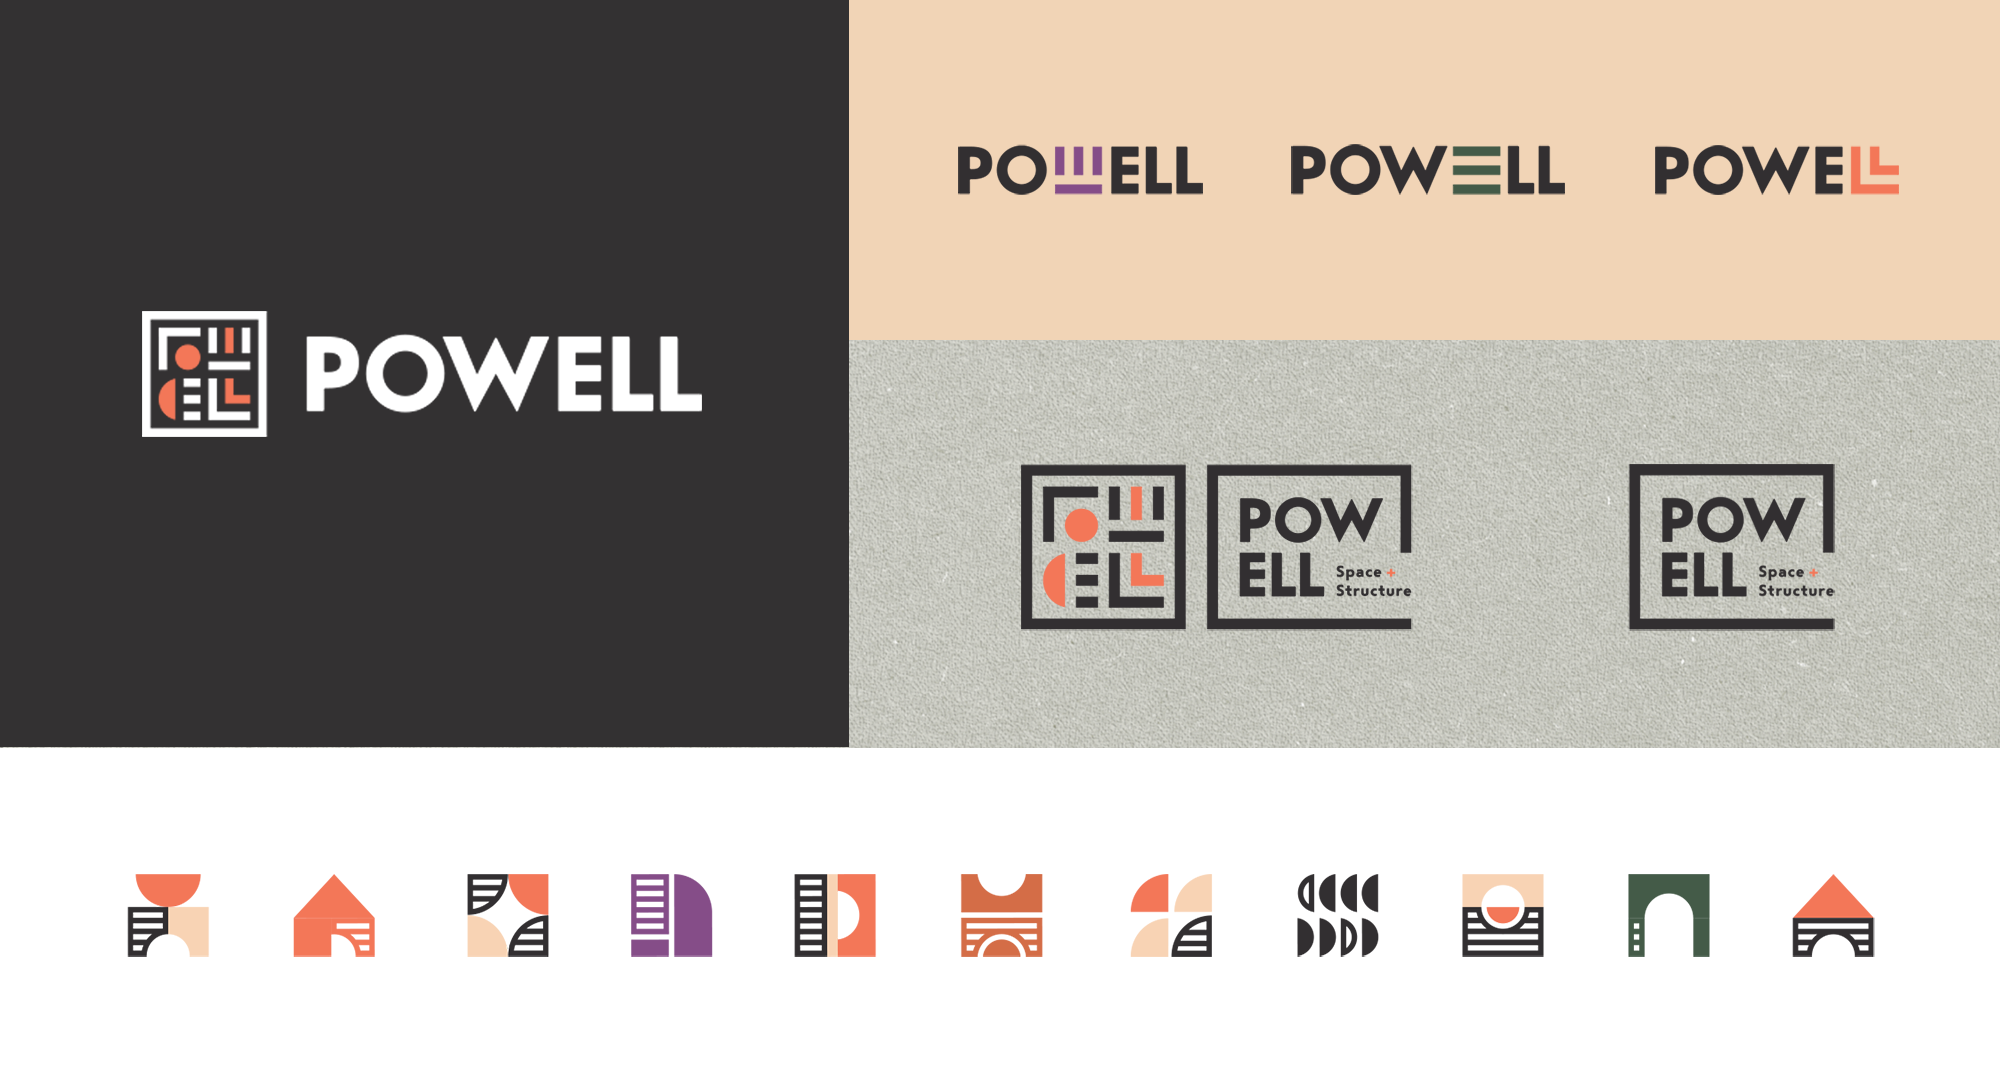 Powell_Feature Image